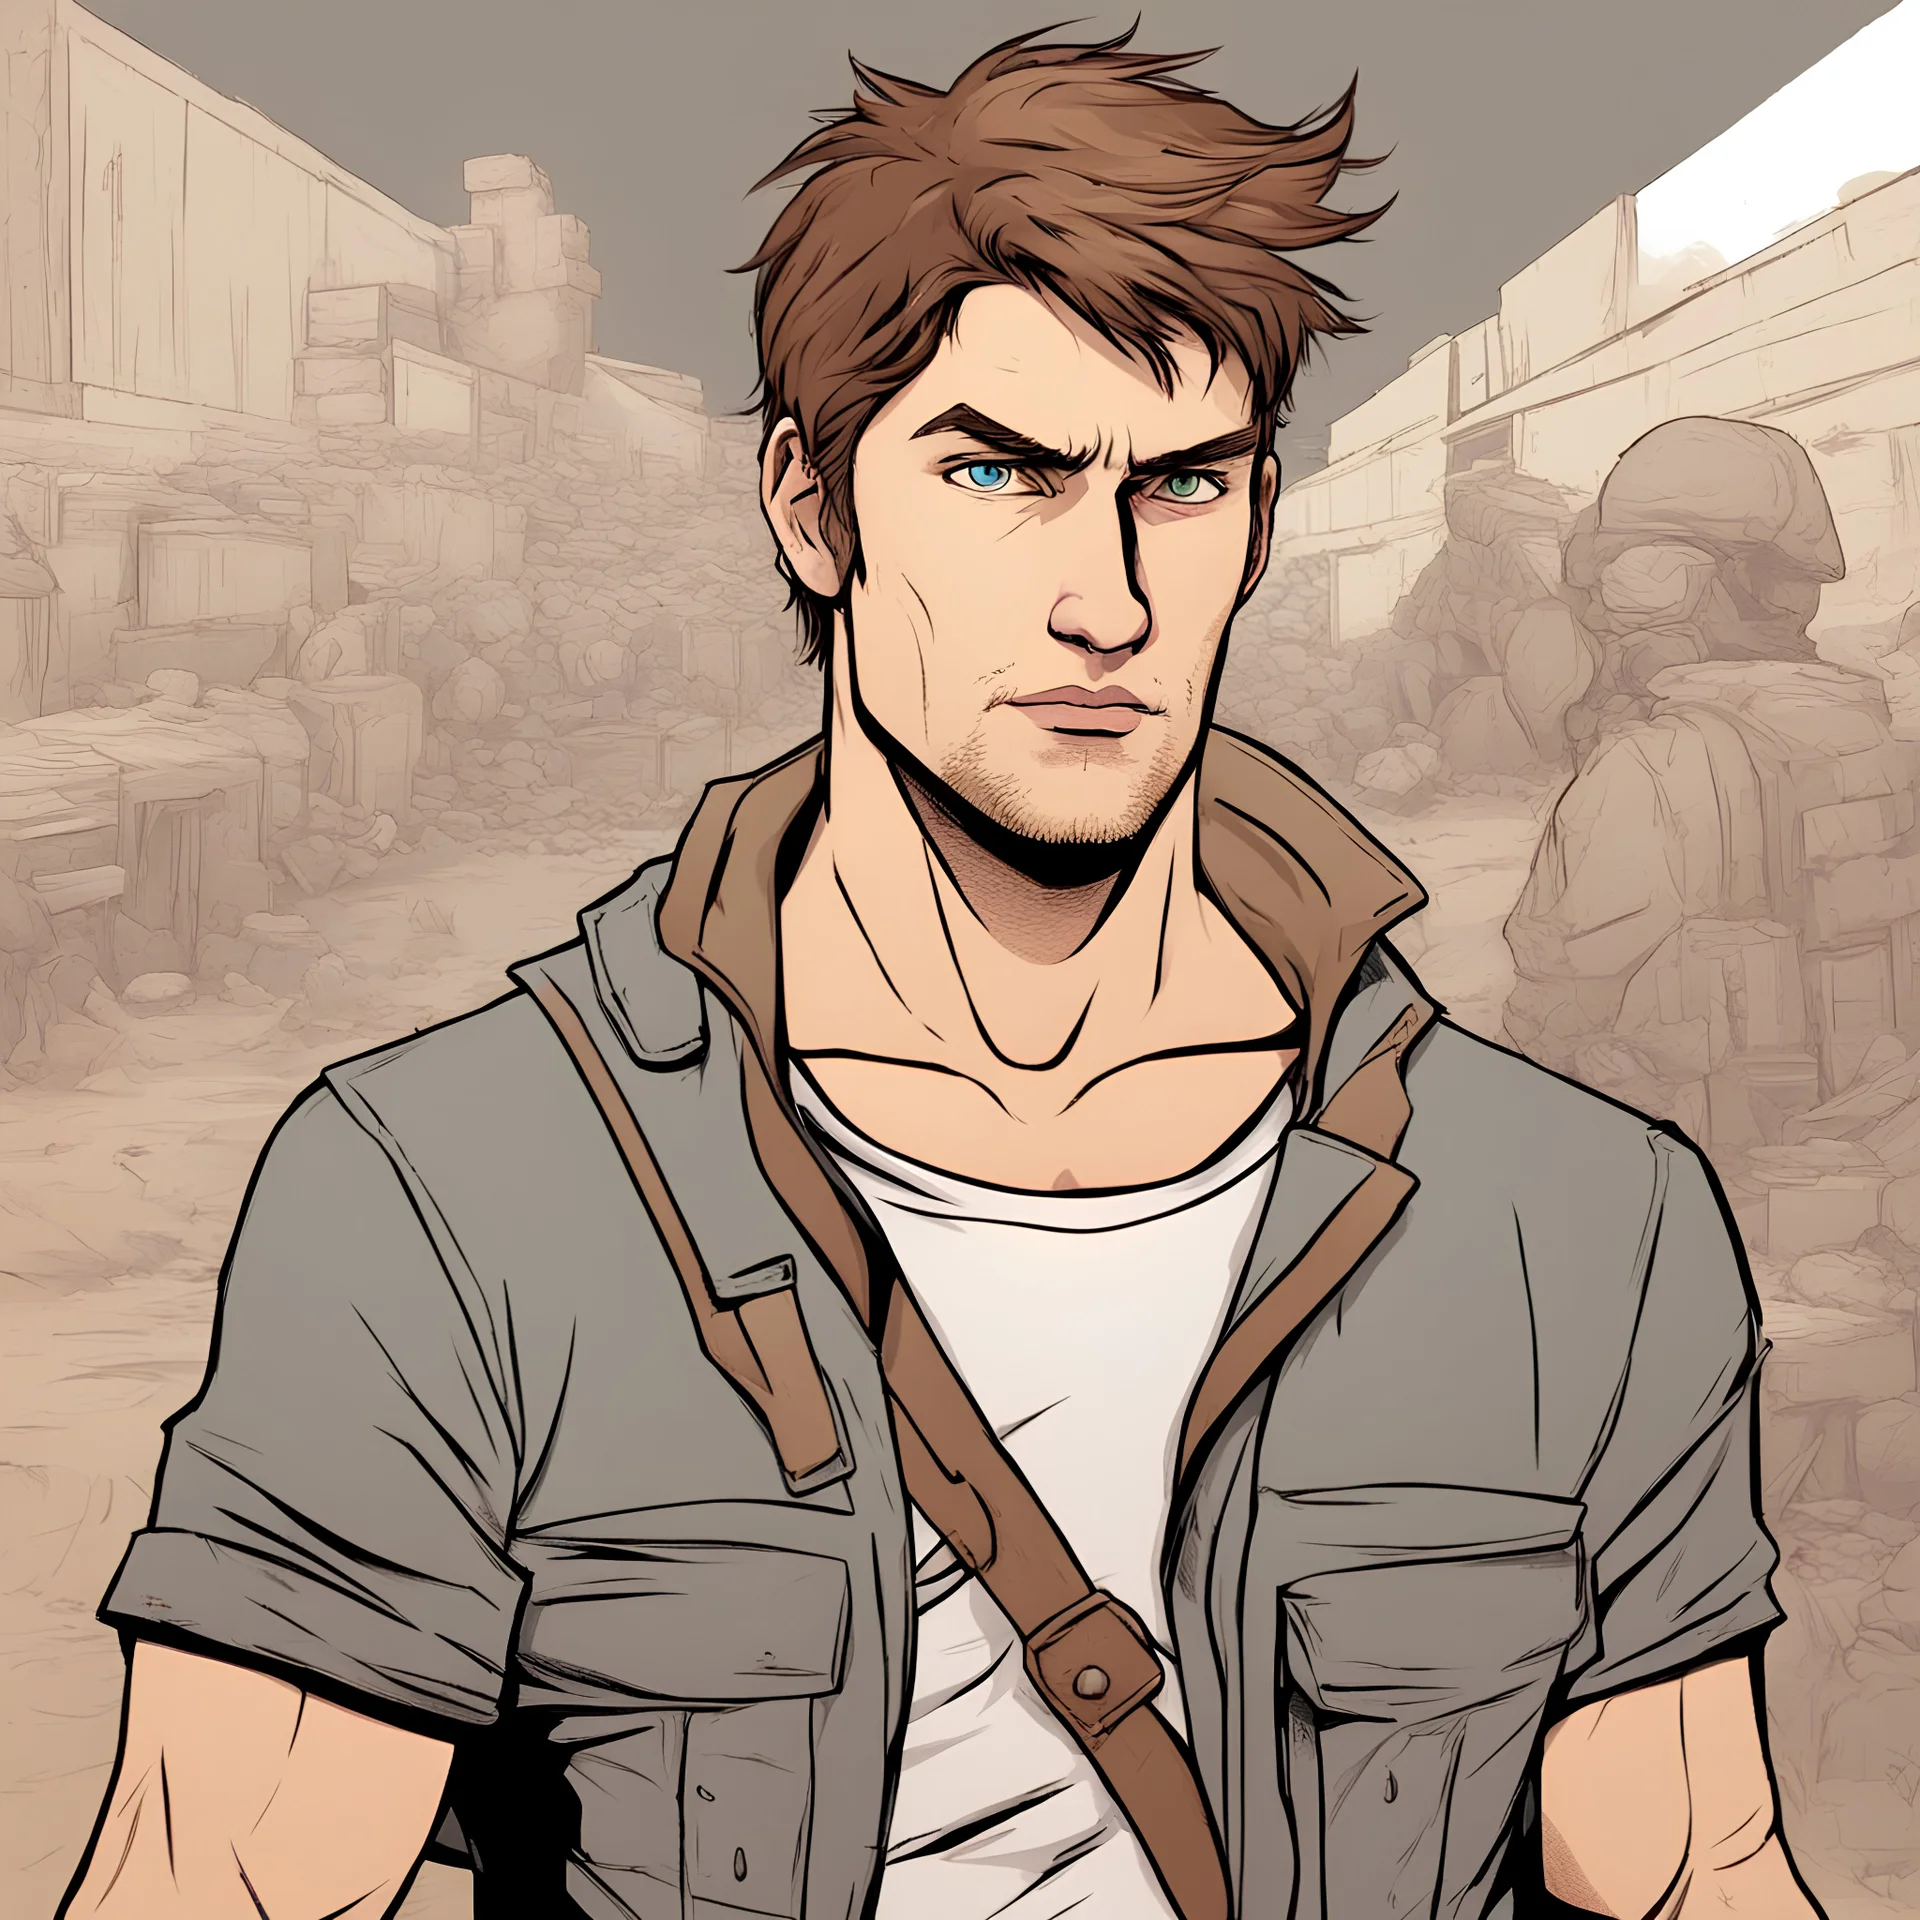 Portrait, male character with brown hair, t-shirt comic book illustration looking straight ahead, post apocalypse